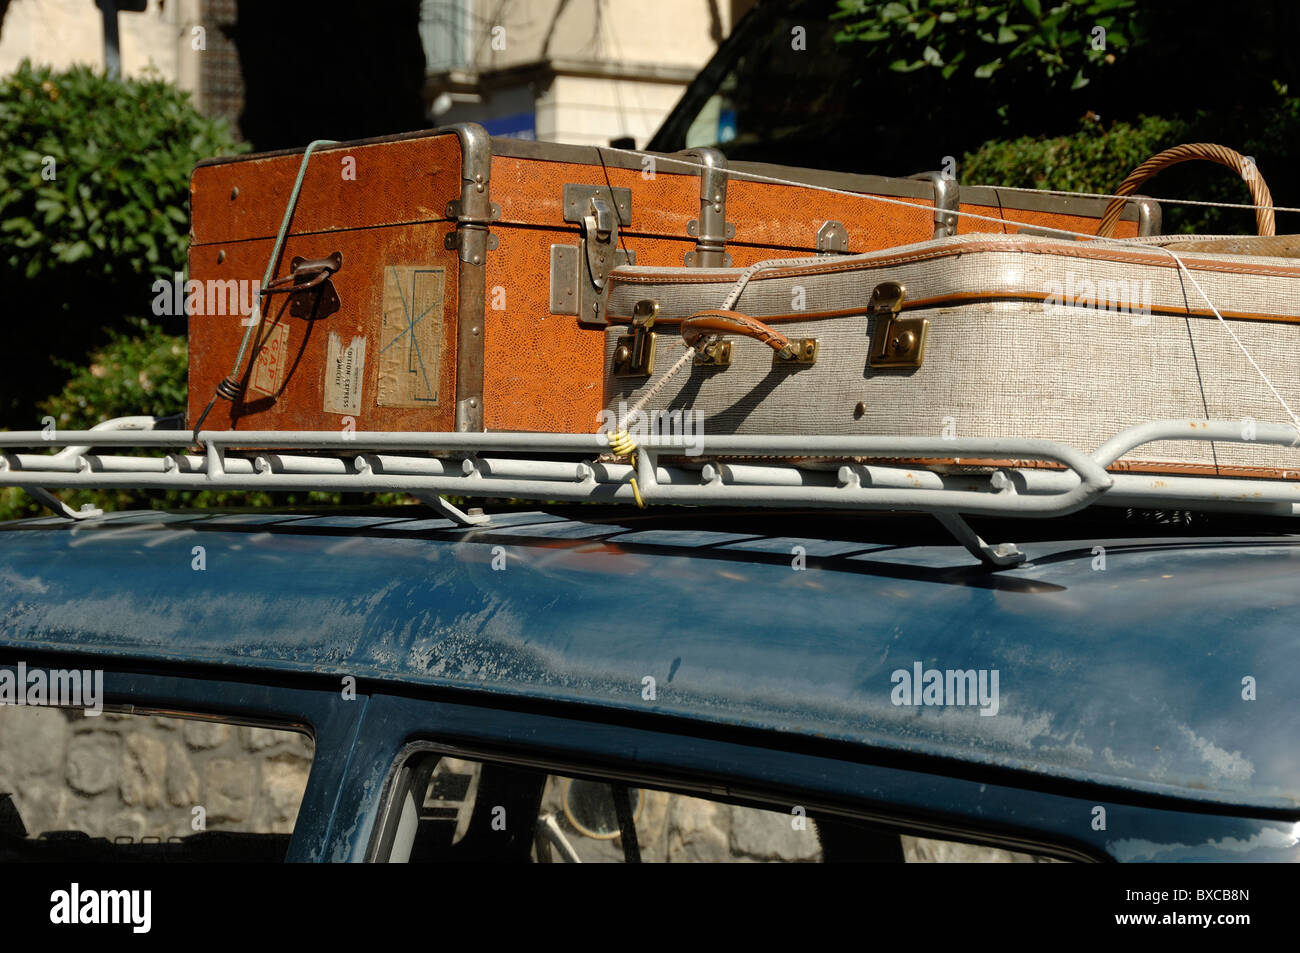 Vintage Luggage, Travel Trunk or Suitcases Tied to Old Roof Rack on Old Peugeot 403 Car, Forcalquier, Alpes-de-Haute-Provence, Provence France Stock Photo